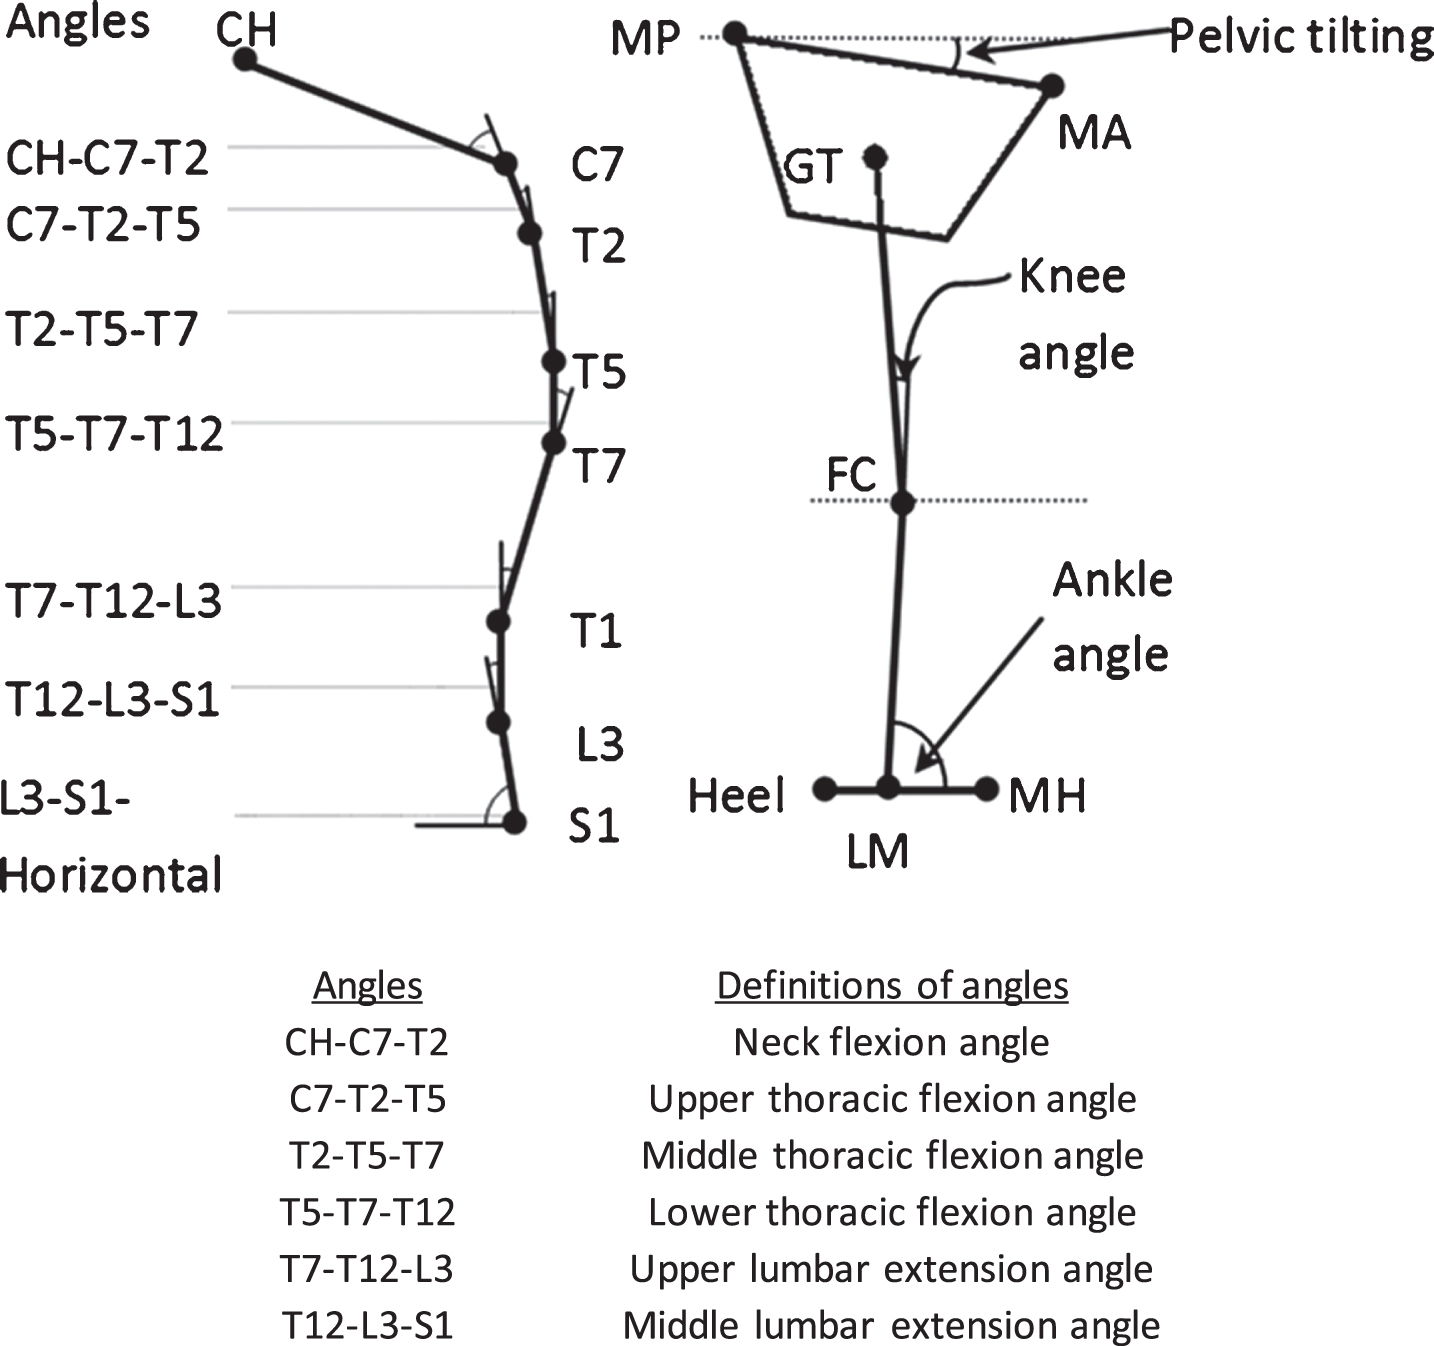 Definitions of various angles of body alignment (Left: Spinal curvature; Right – lower limb angles). CH = chin; MP = mid-point of posterior superior iliac spines; MA = mid-point of anterior superior iliac spine; GT = great trochanter; FC = femoral condyle; LM = lateral malleolus; MH = second metatarsal head.